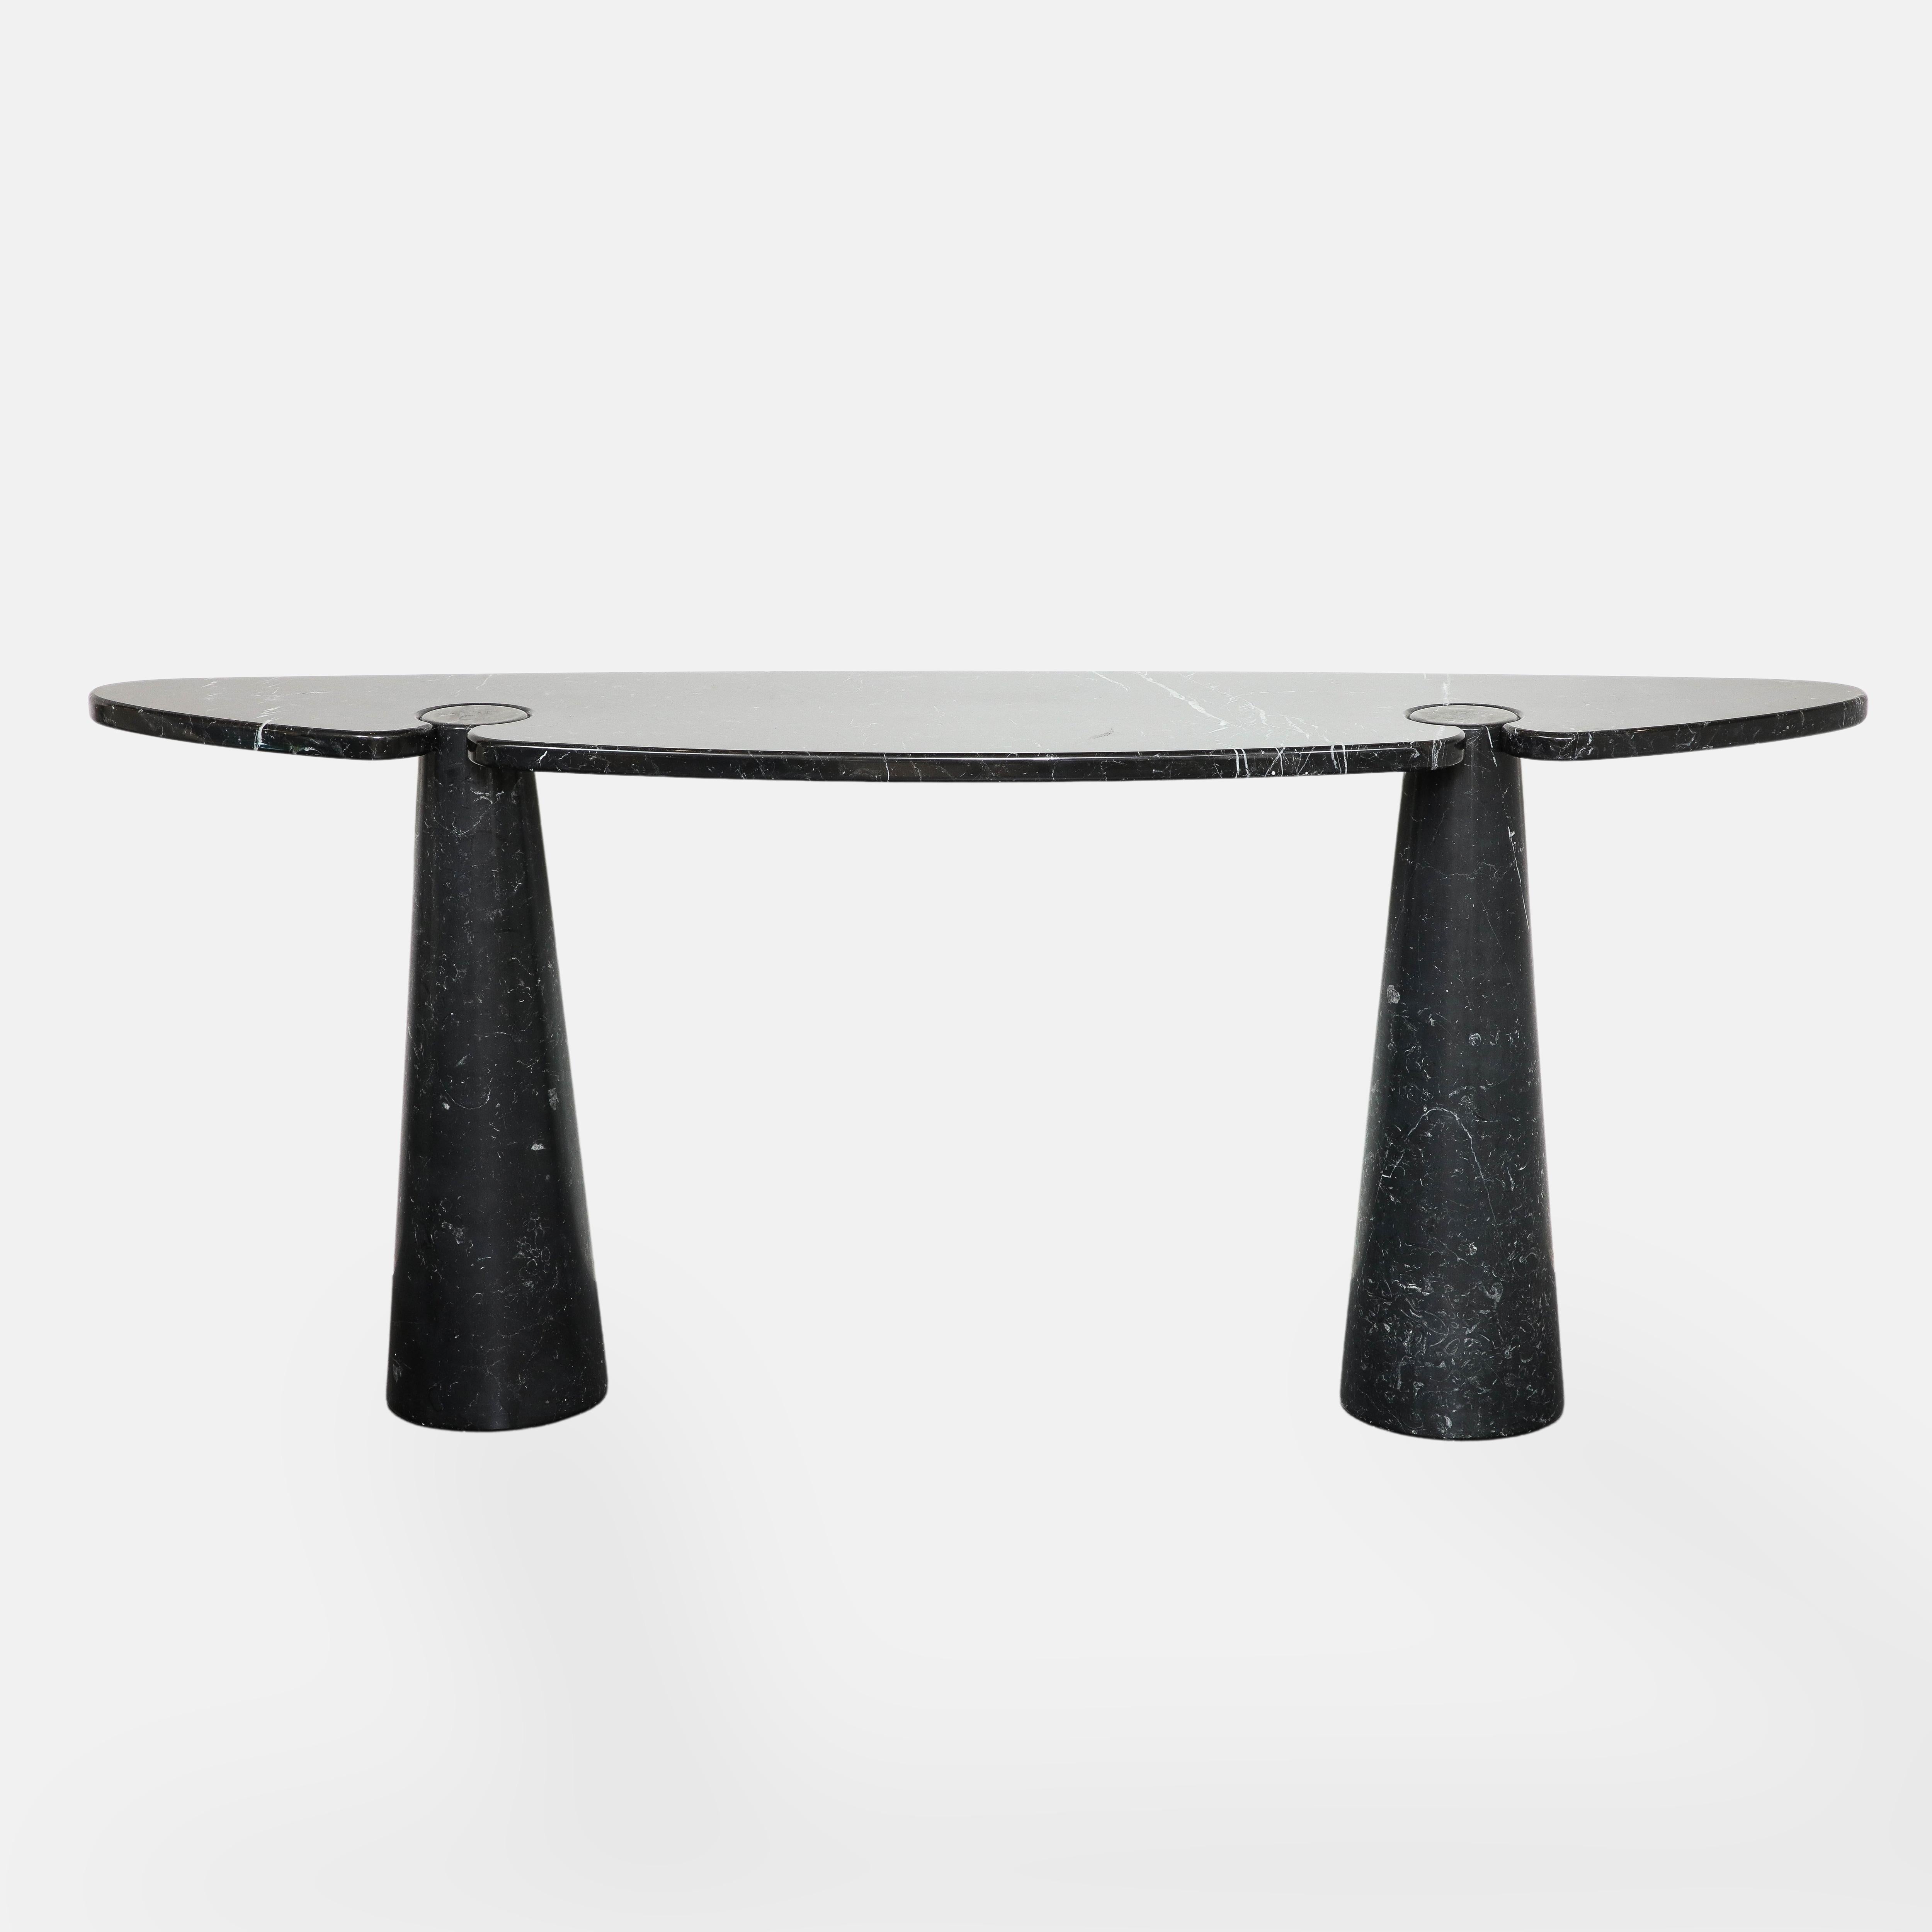 Designed by Angelo Mangiarotti for Skipper from the Eros series, iconic black or Nero Marquina marble console table with large elliptical top fitted on two conical bases. This elegantly organic console table has exquisite veining throughout on the